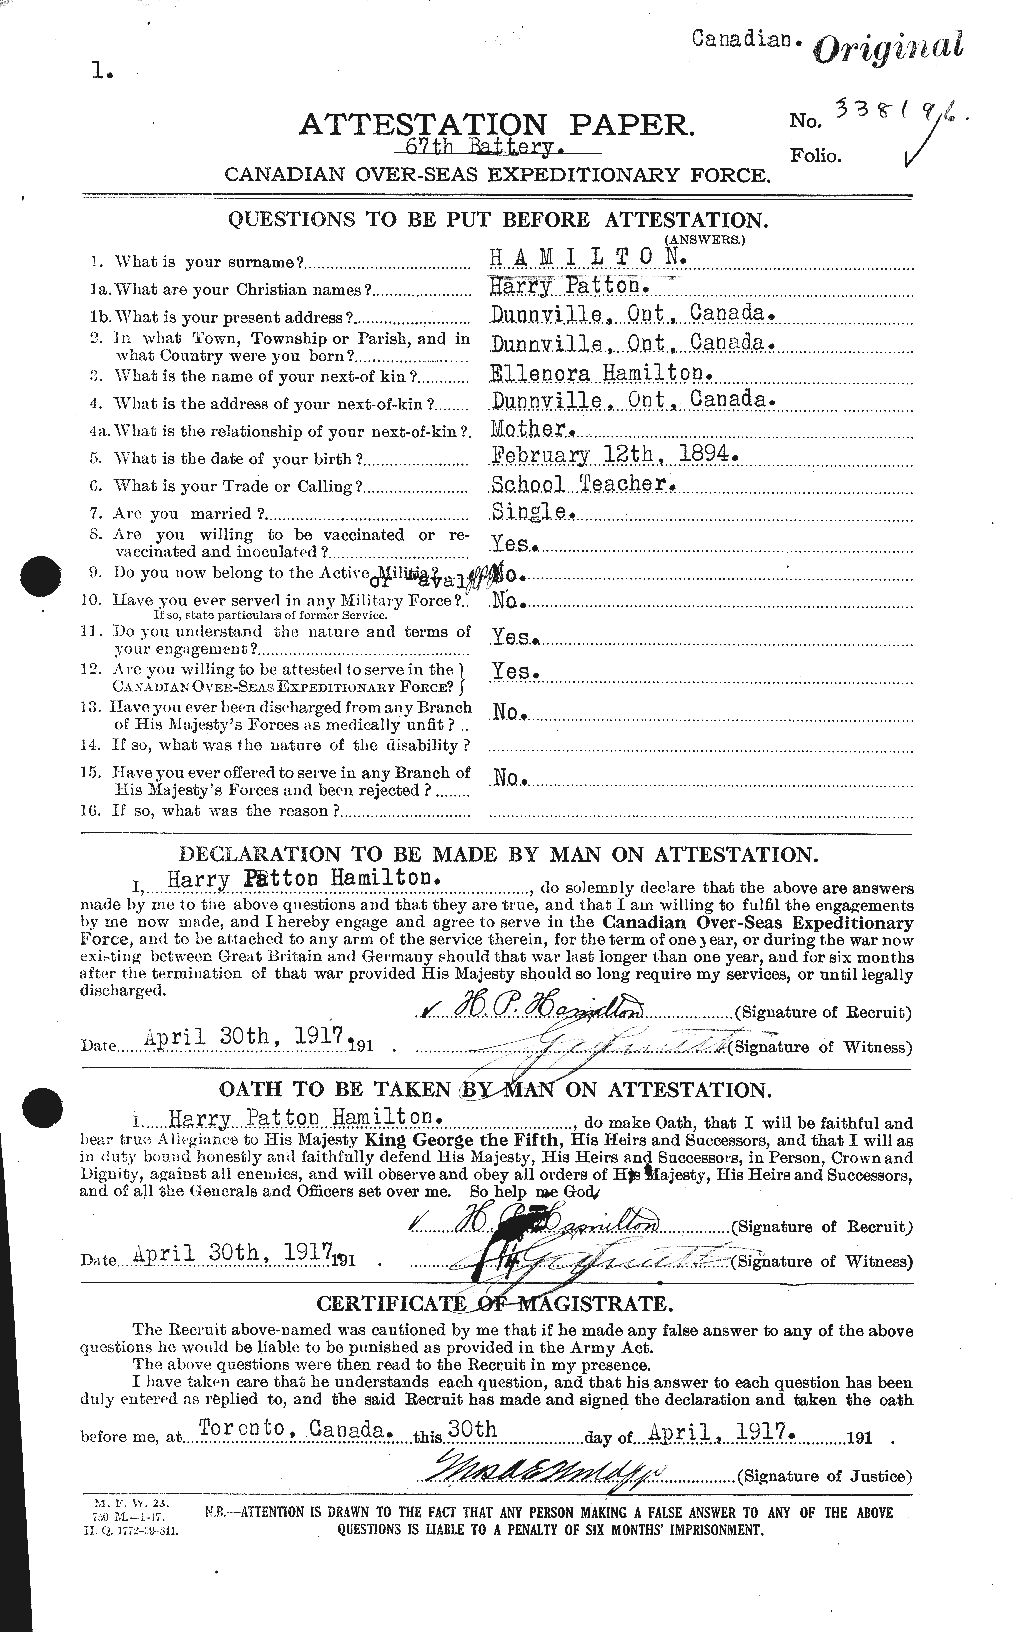 Personnel Records of the First World War - CEF 372514a